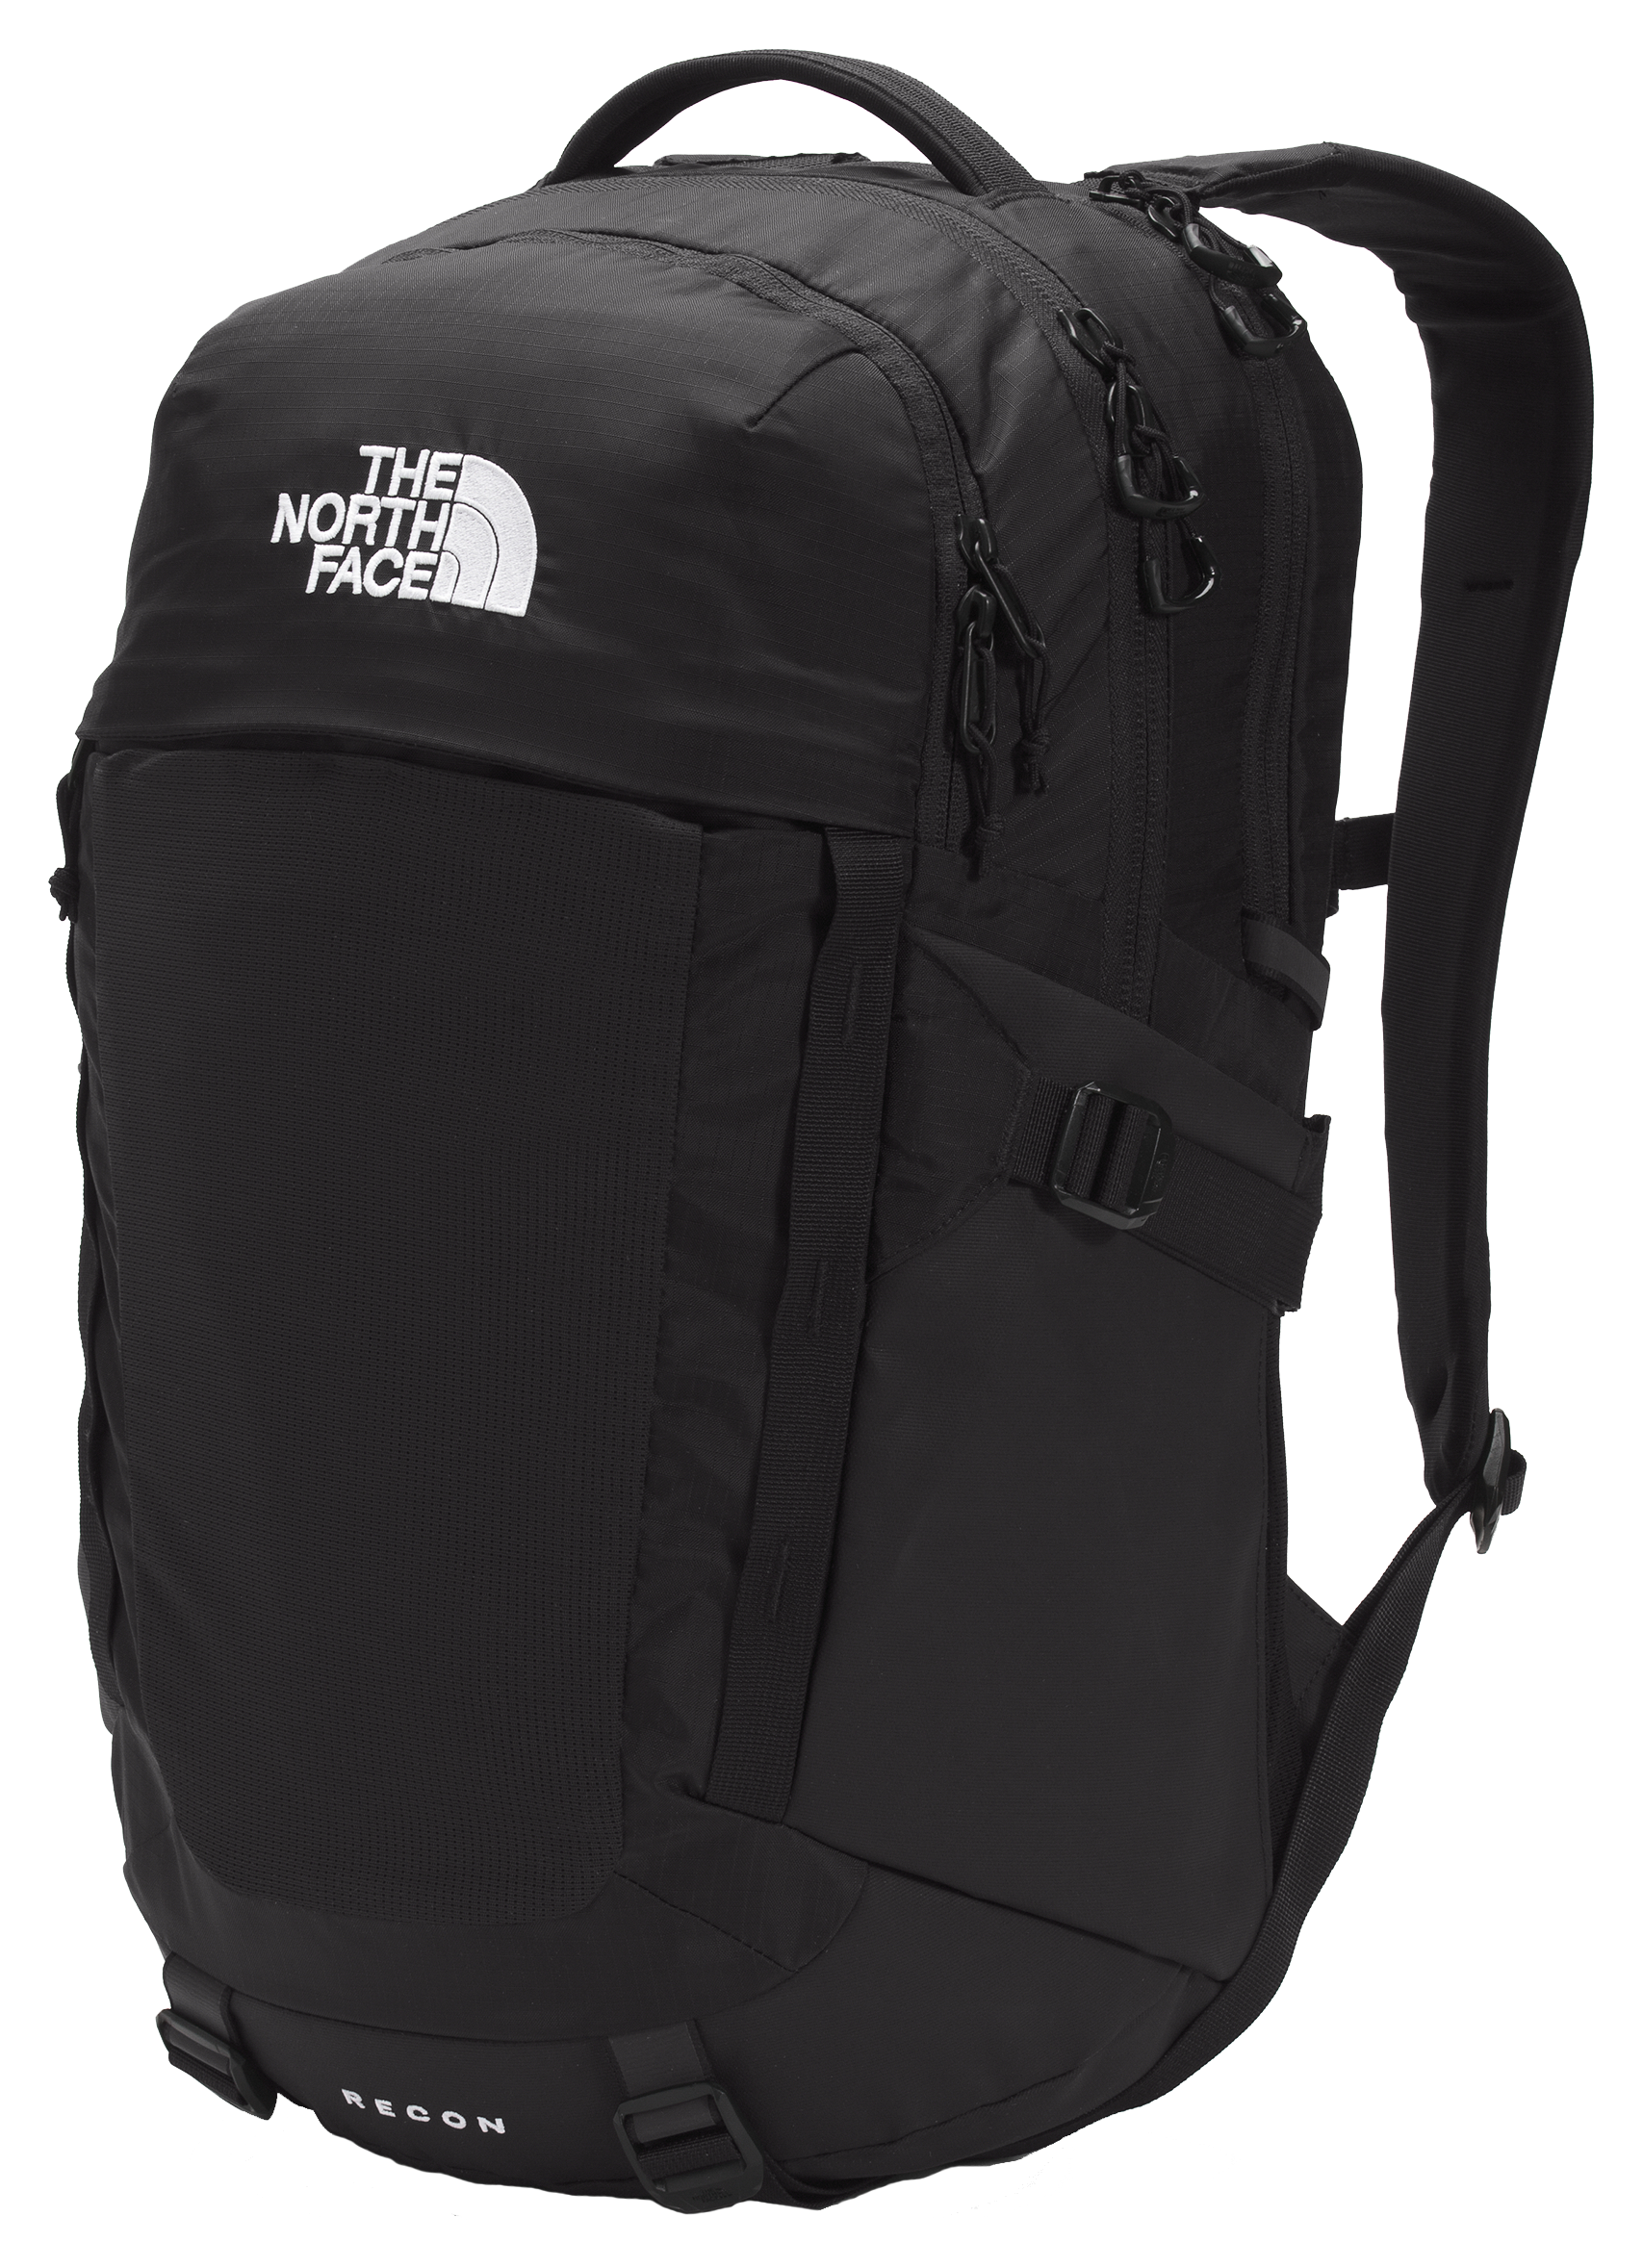 The North Face Recon 30 Backpack